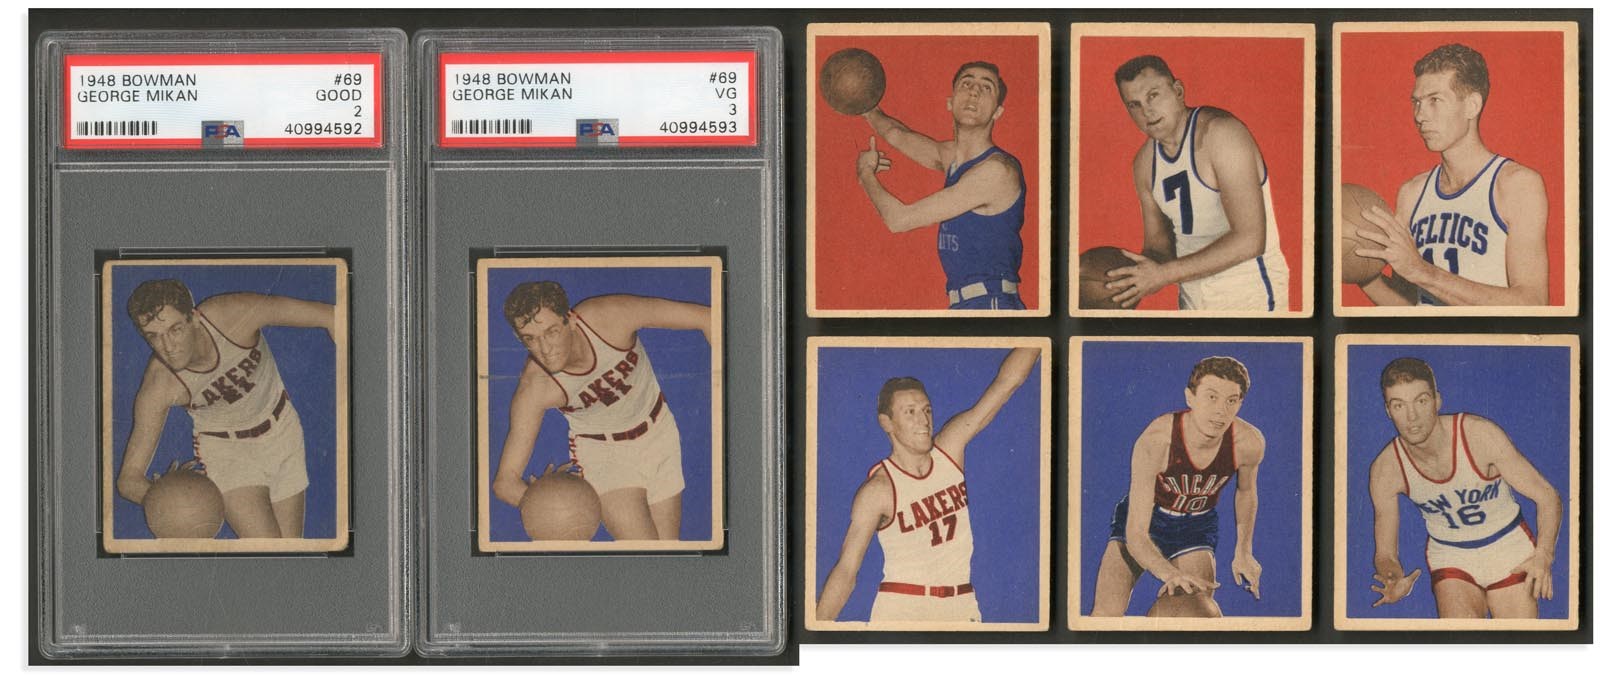 - 1948 Bowman Basketball Complete Set with (2) PSA Graded Mikan Rookies